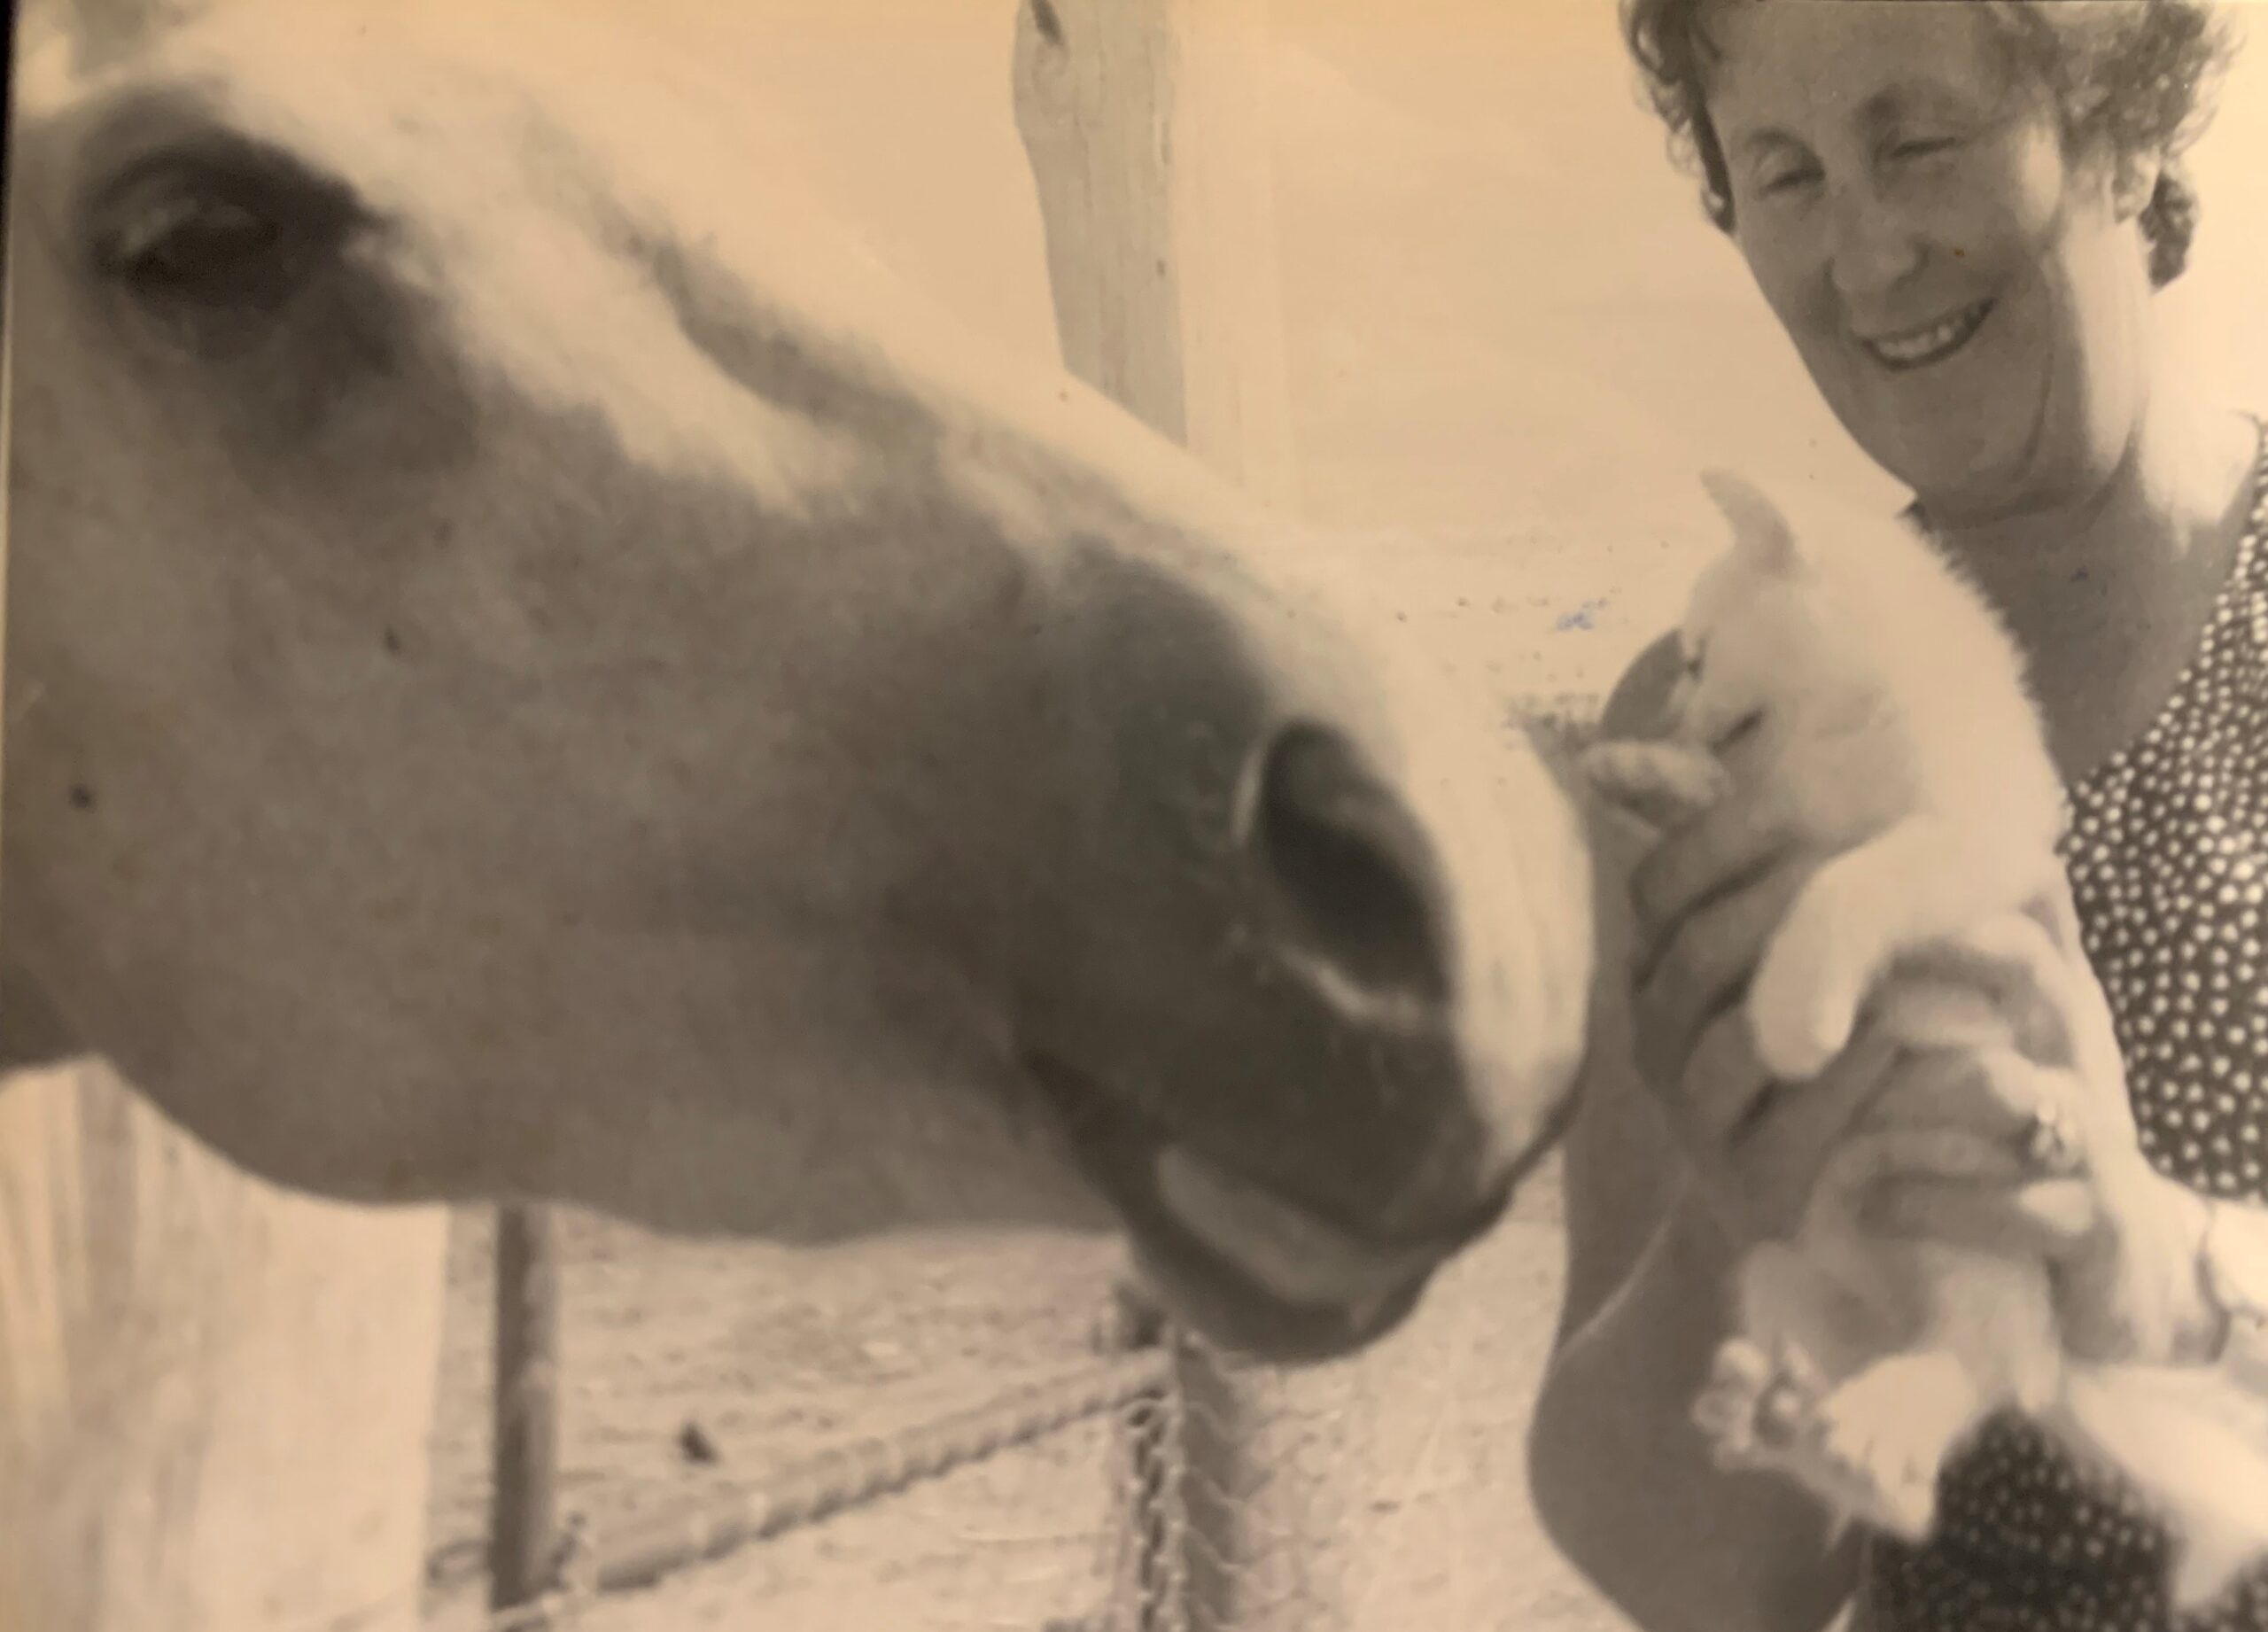 Jan’s inherent love of horses meant she bred many foals with quiet temperaments which became much-loved Pony Club ponies in the district.